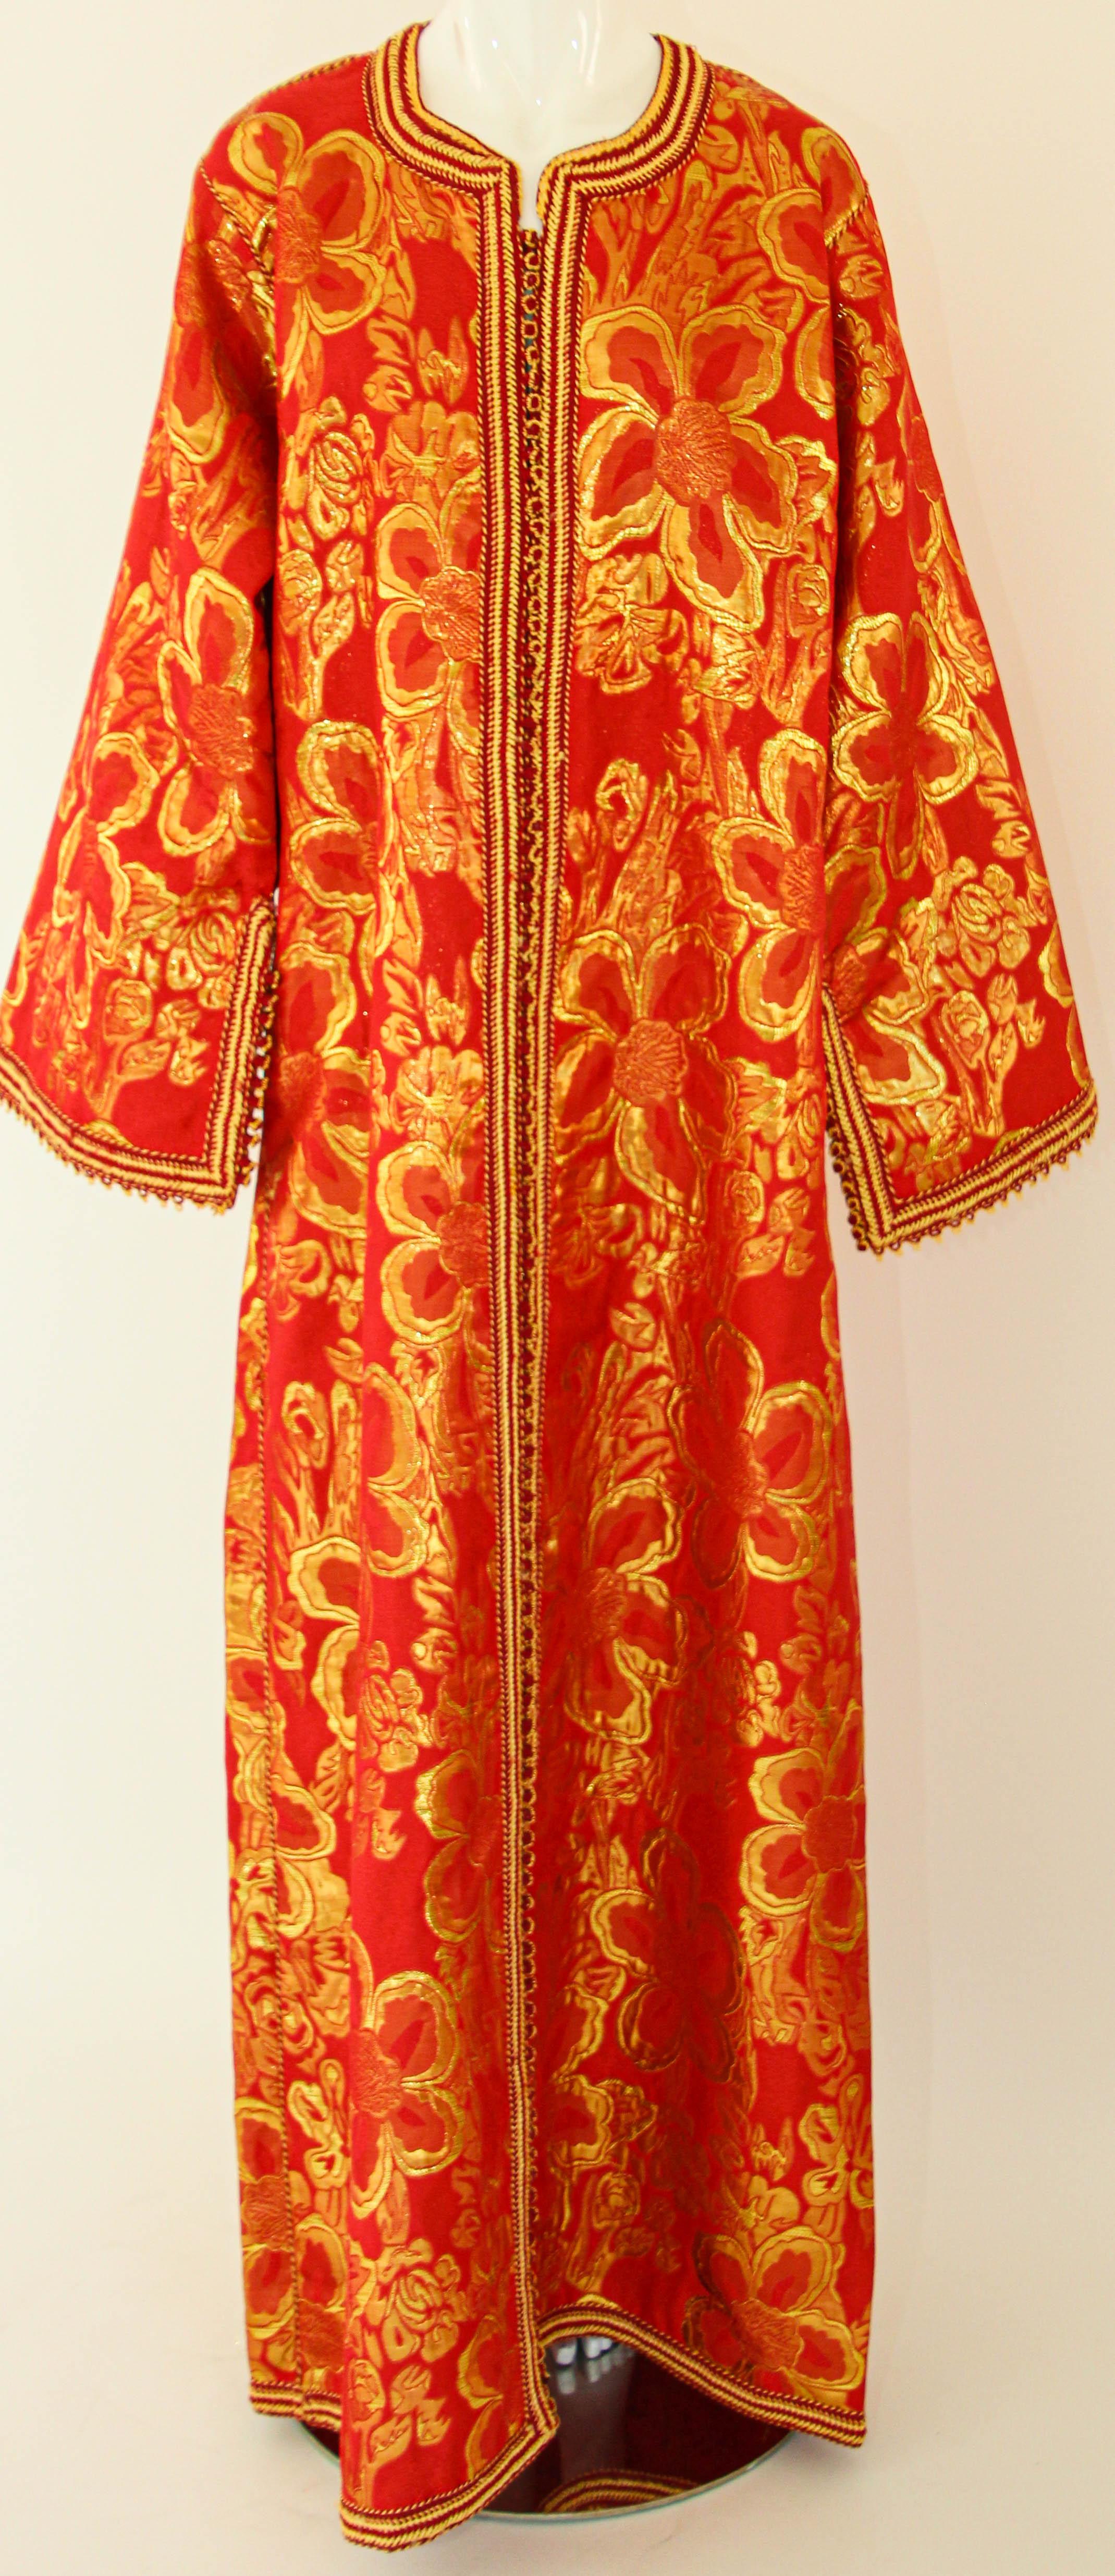 1970s Vintage Moroccan Kaftan Red and Gold Brocade Caftan Maxi Dress For Sale 6